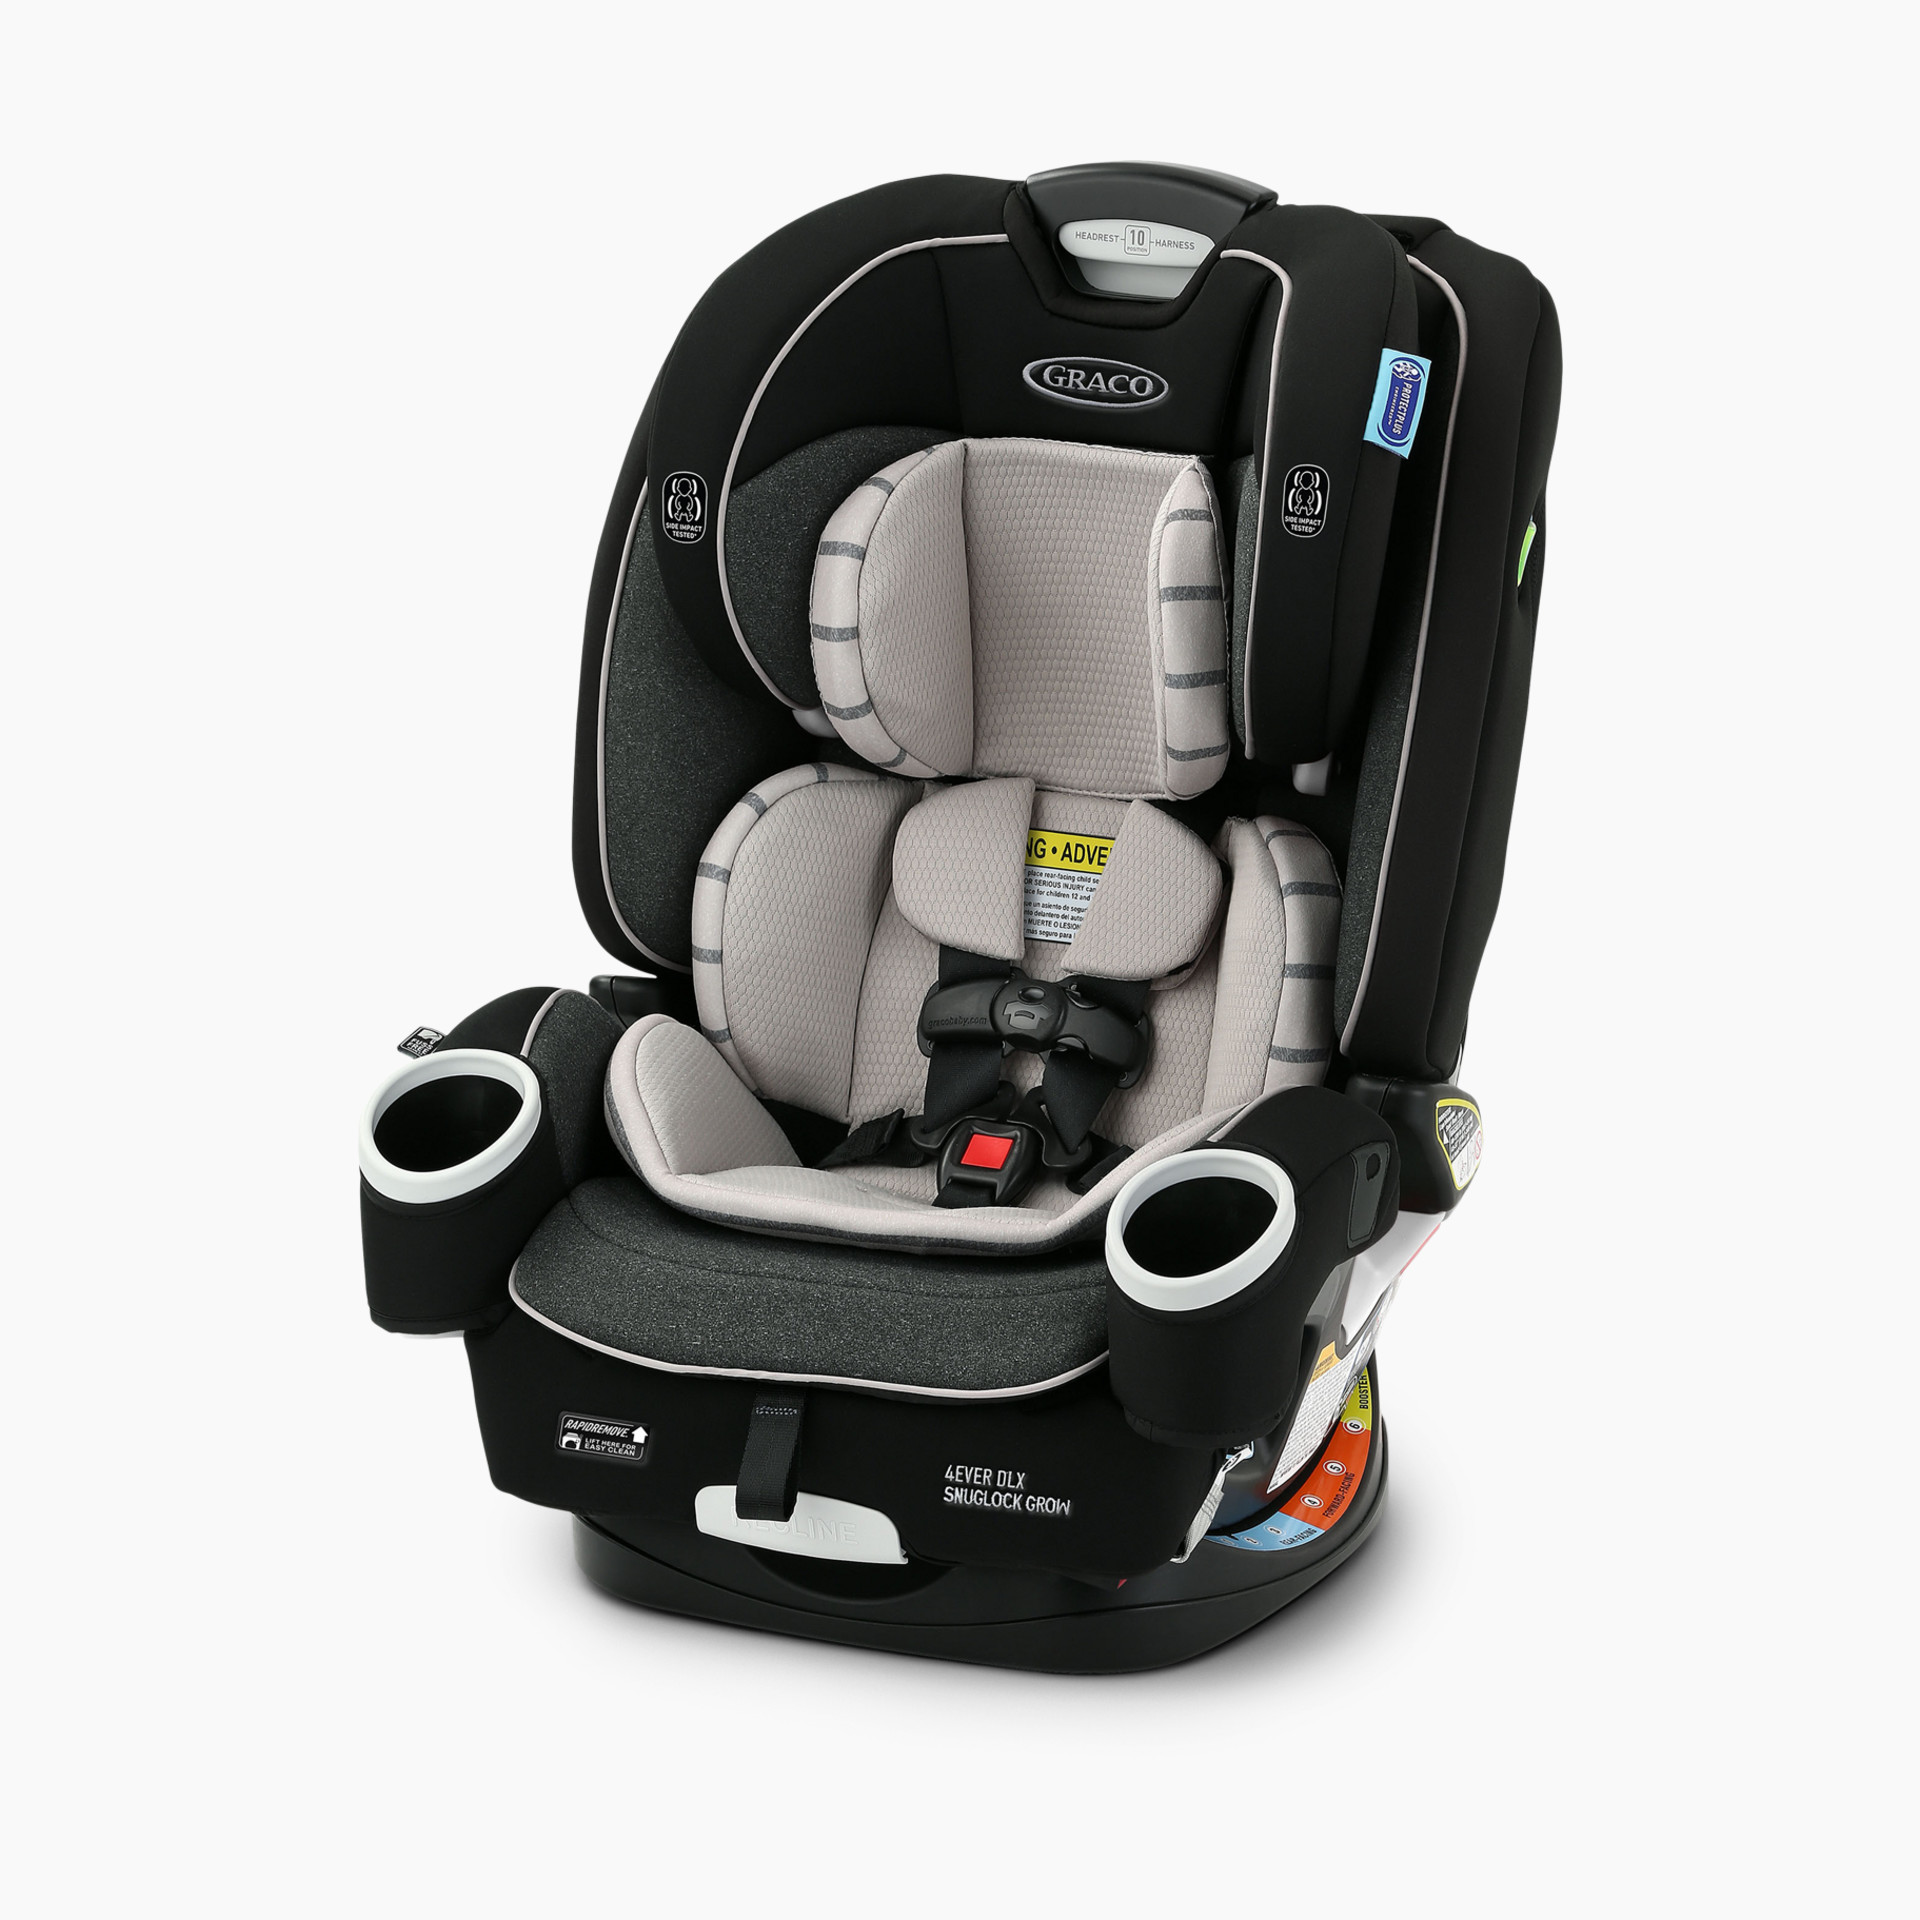 Graco 4ever Dlx Snuglock Grow 4 In 1 Car Seat Babylist Store